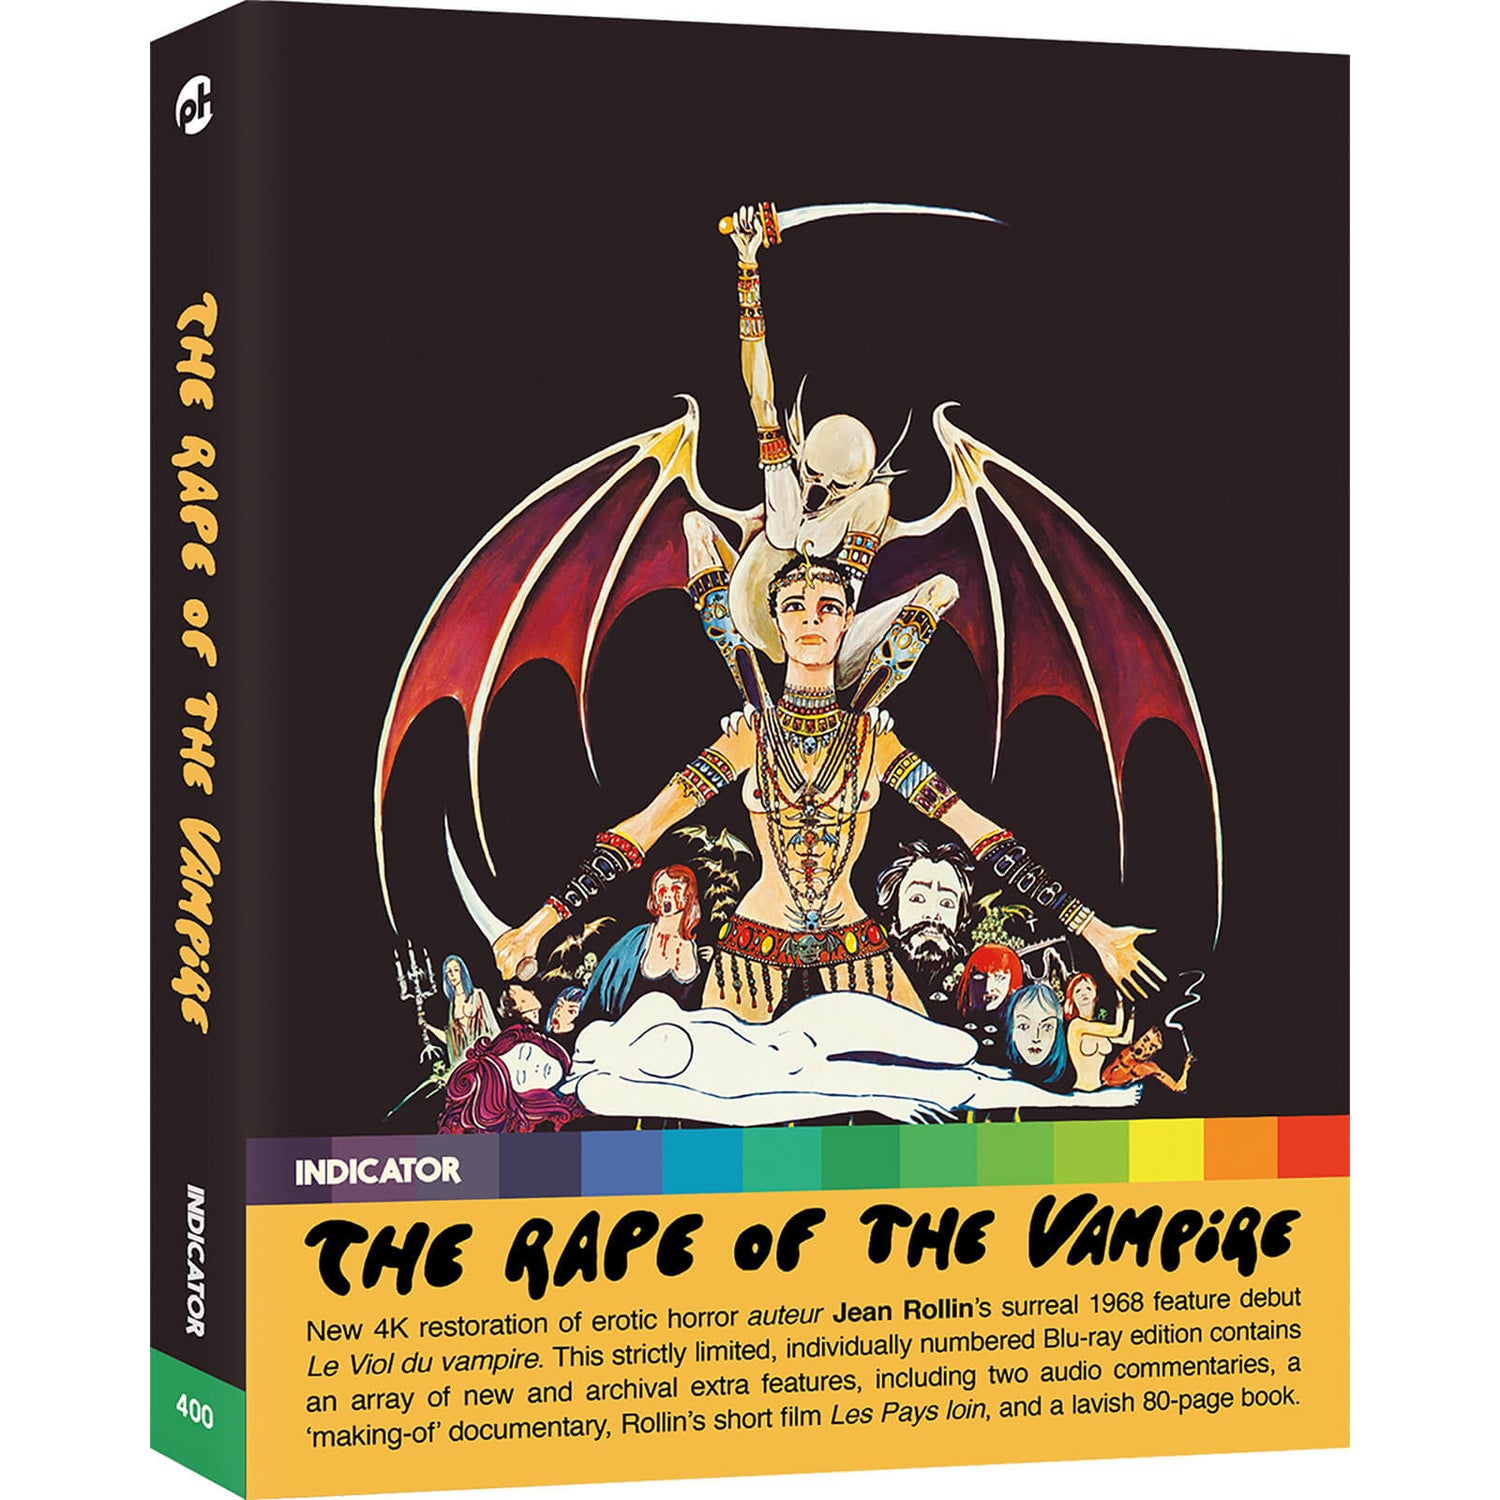 The Rape Of The Vampire - Limited Edition